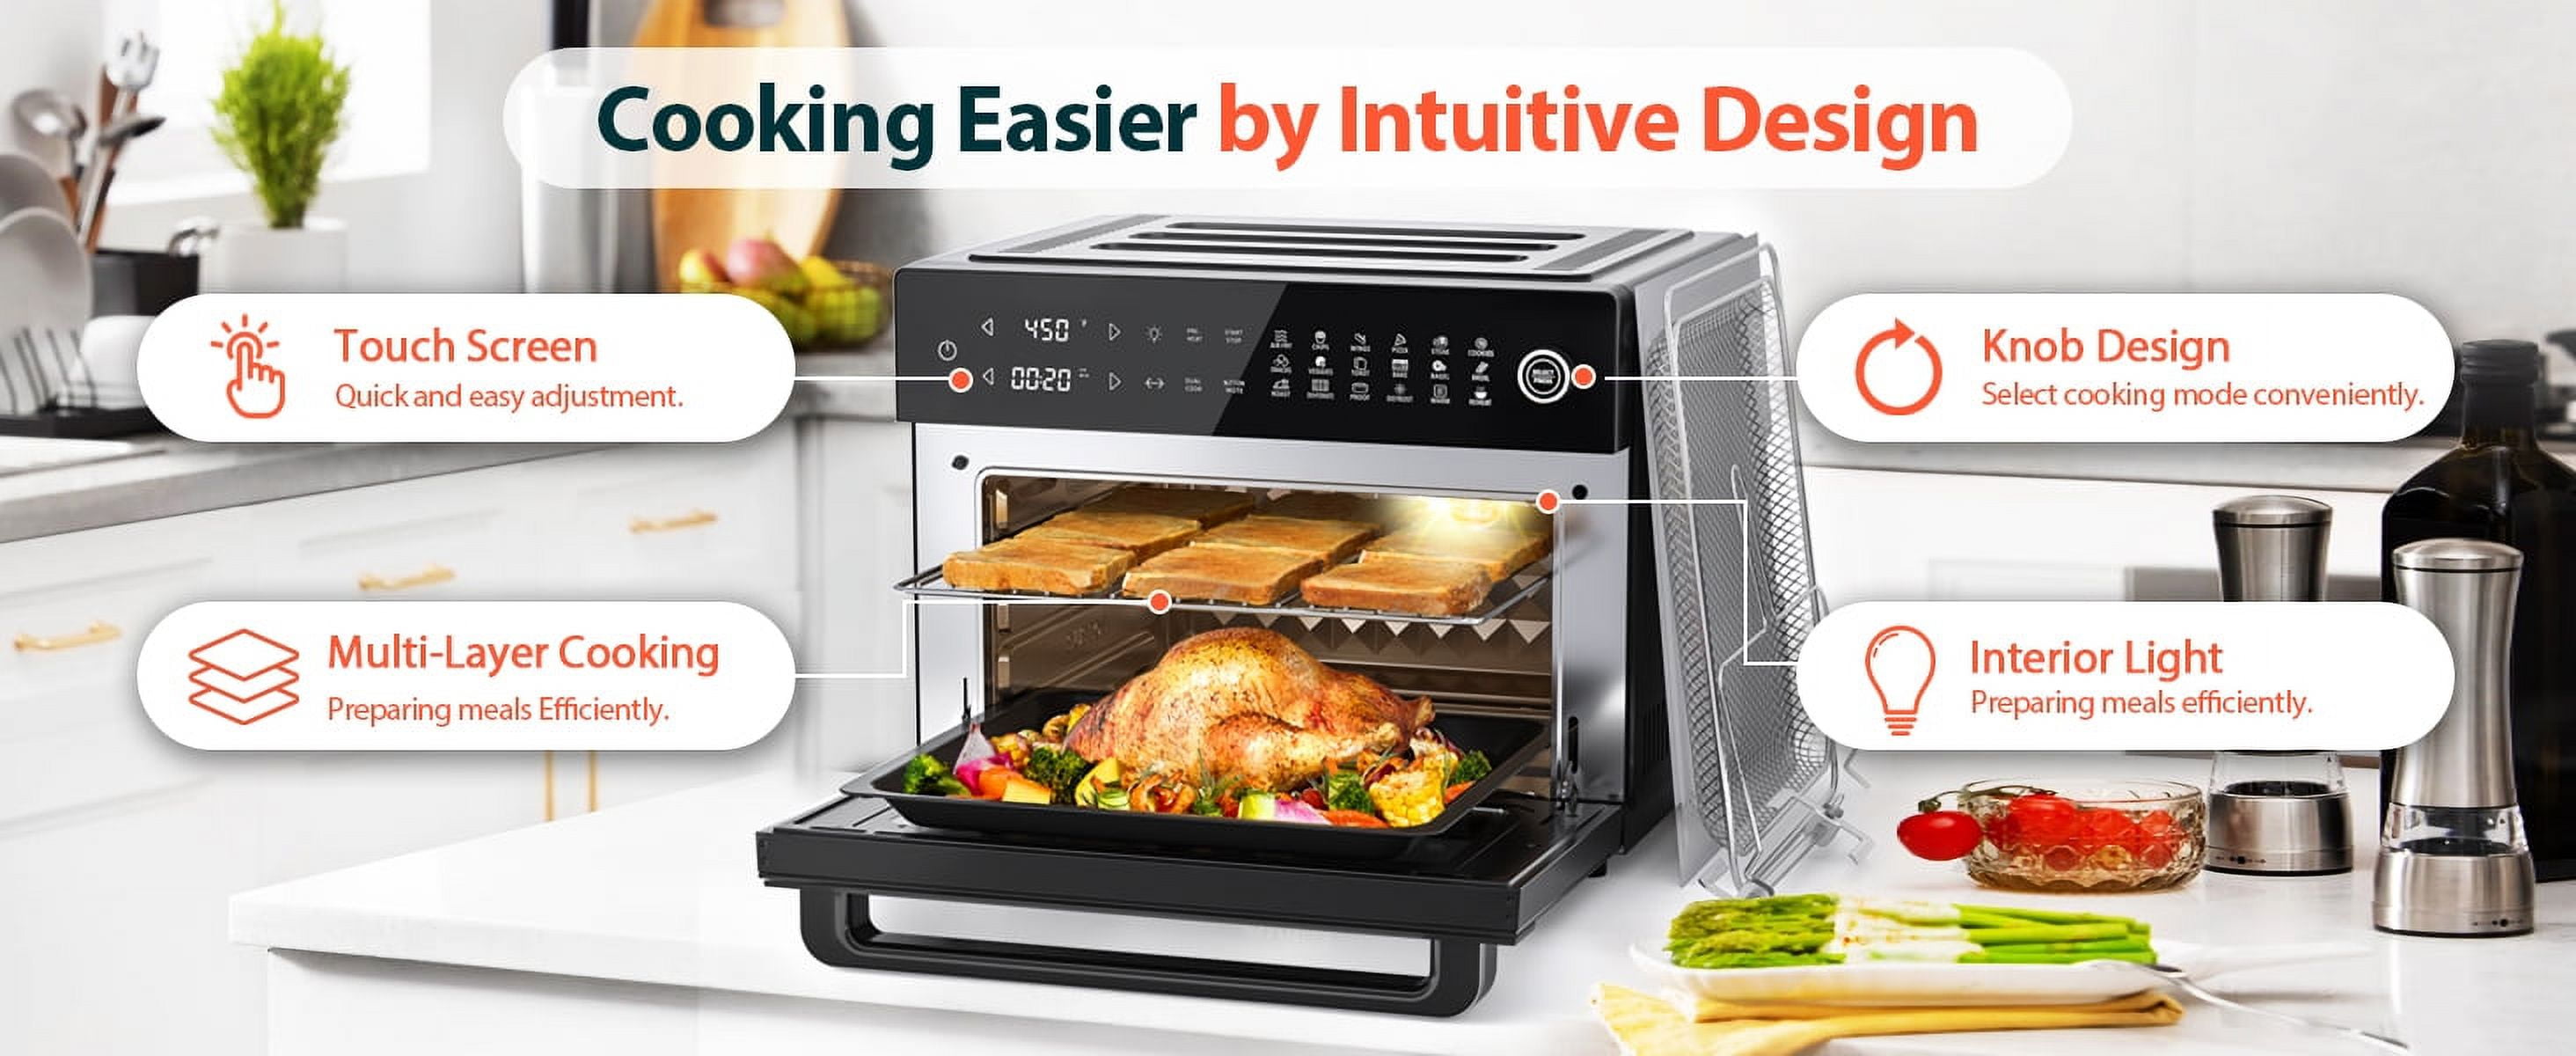 32 QT Digital Toaster Oven Air Fryer Combo, AUMATE by Kitchen in the box  Convection Oven Countertop, 19-in-1 Smart Airfryer, Pizza Oven, Toast Bake